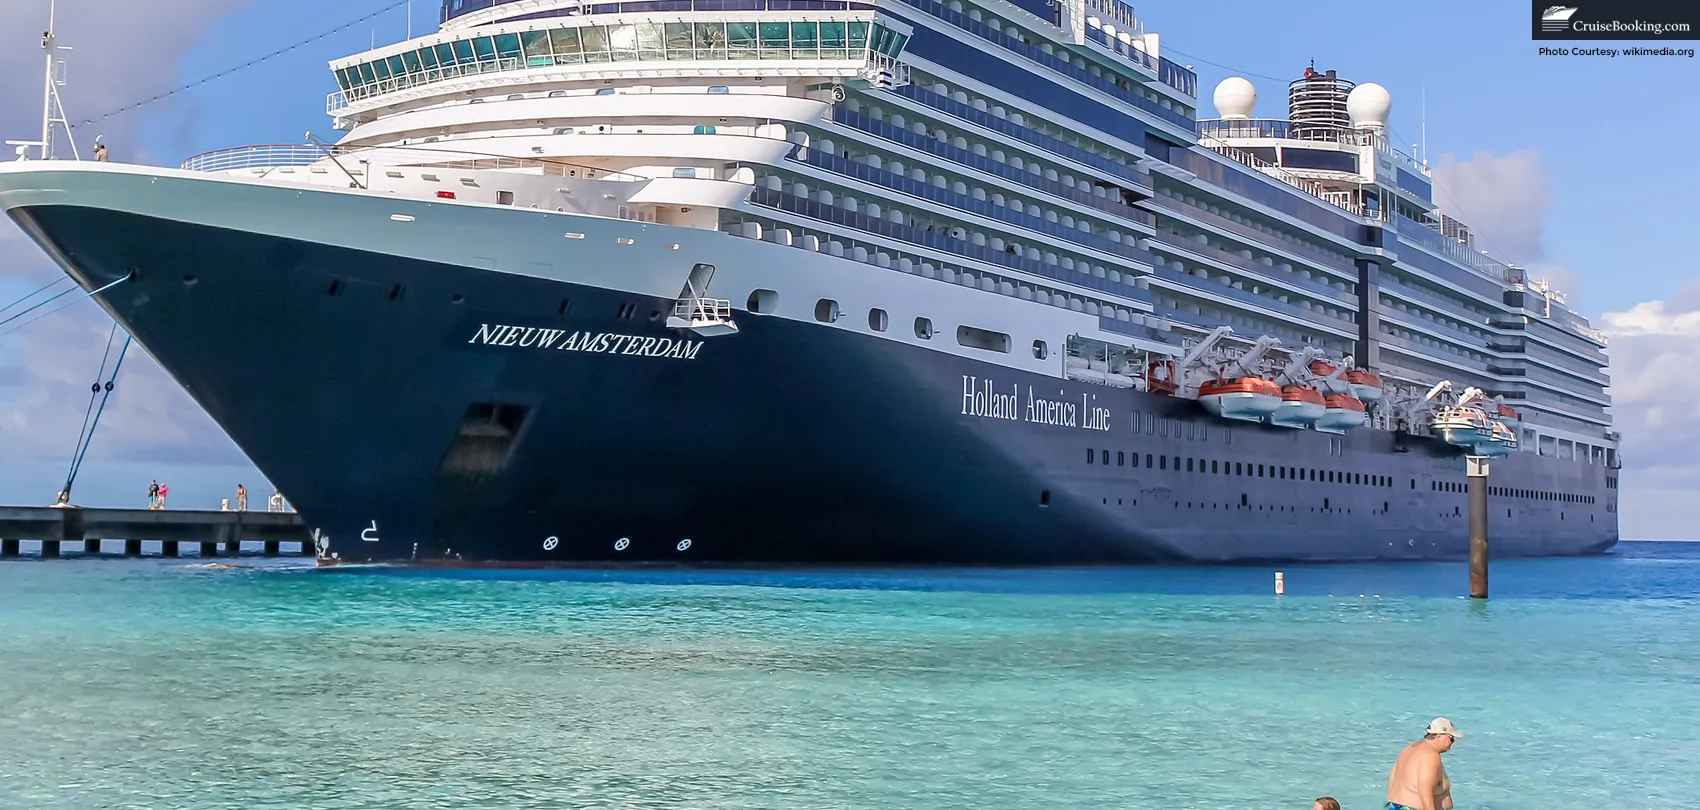 ‘Anniversary Sale’ launched by Holland America Line